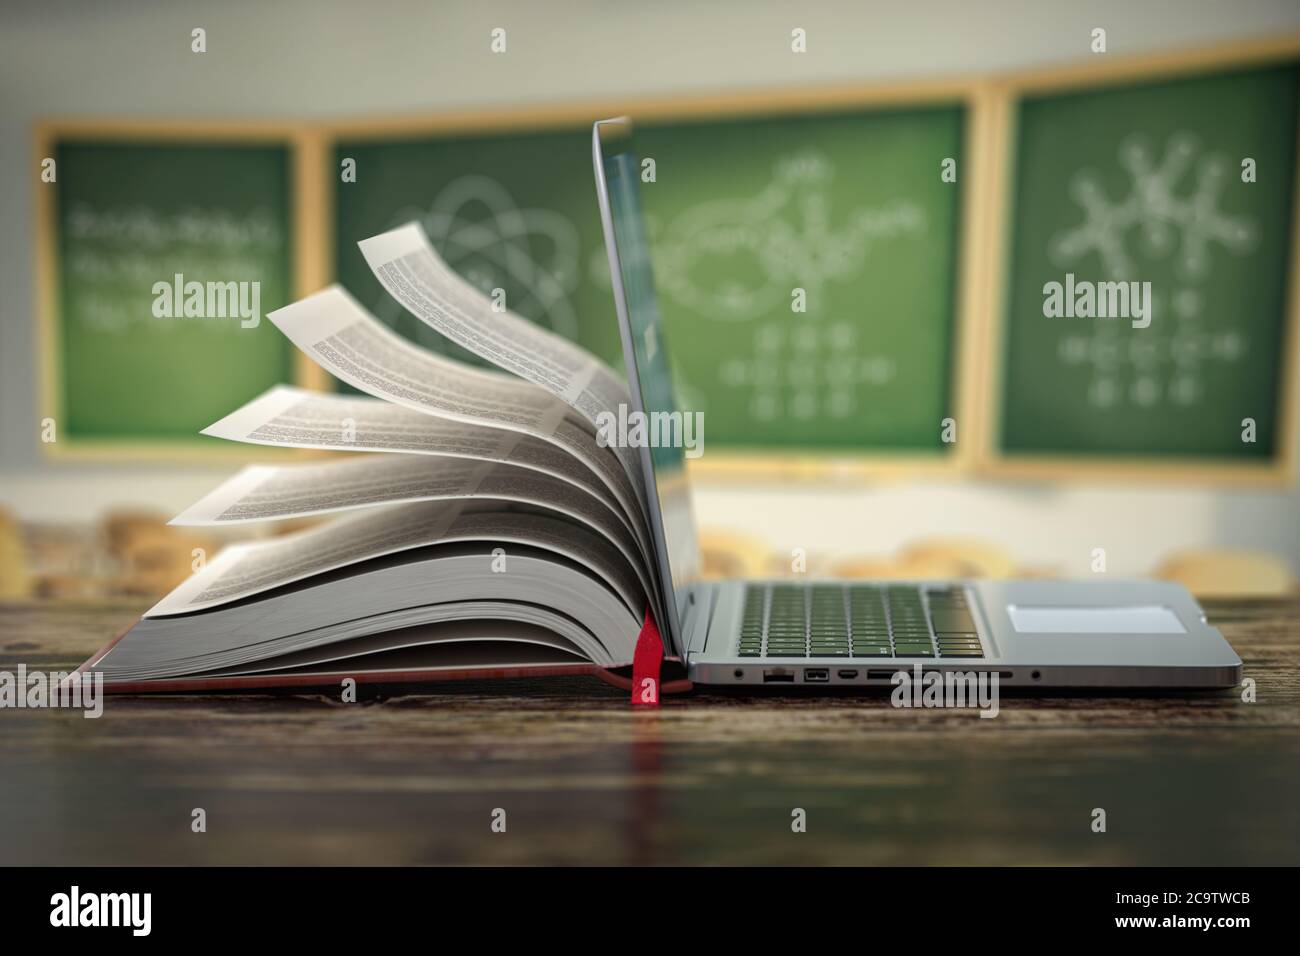 E-learning online education or internet  encyclopedia concept. Open laptop and book compilation in a classroom. 3d illustration Stock Photo